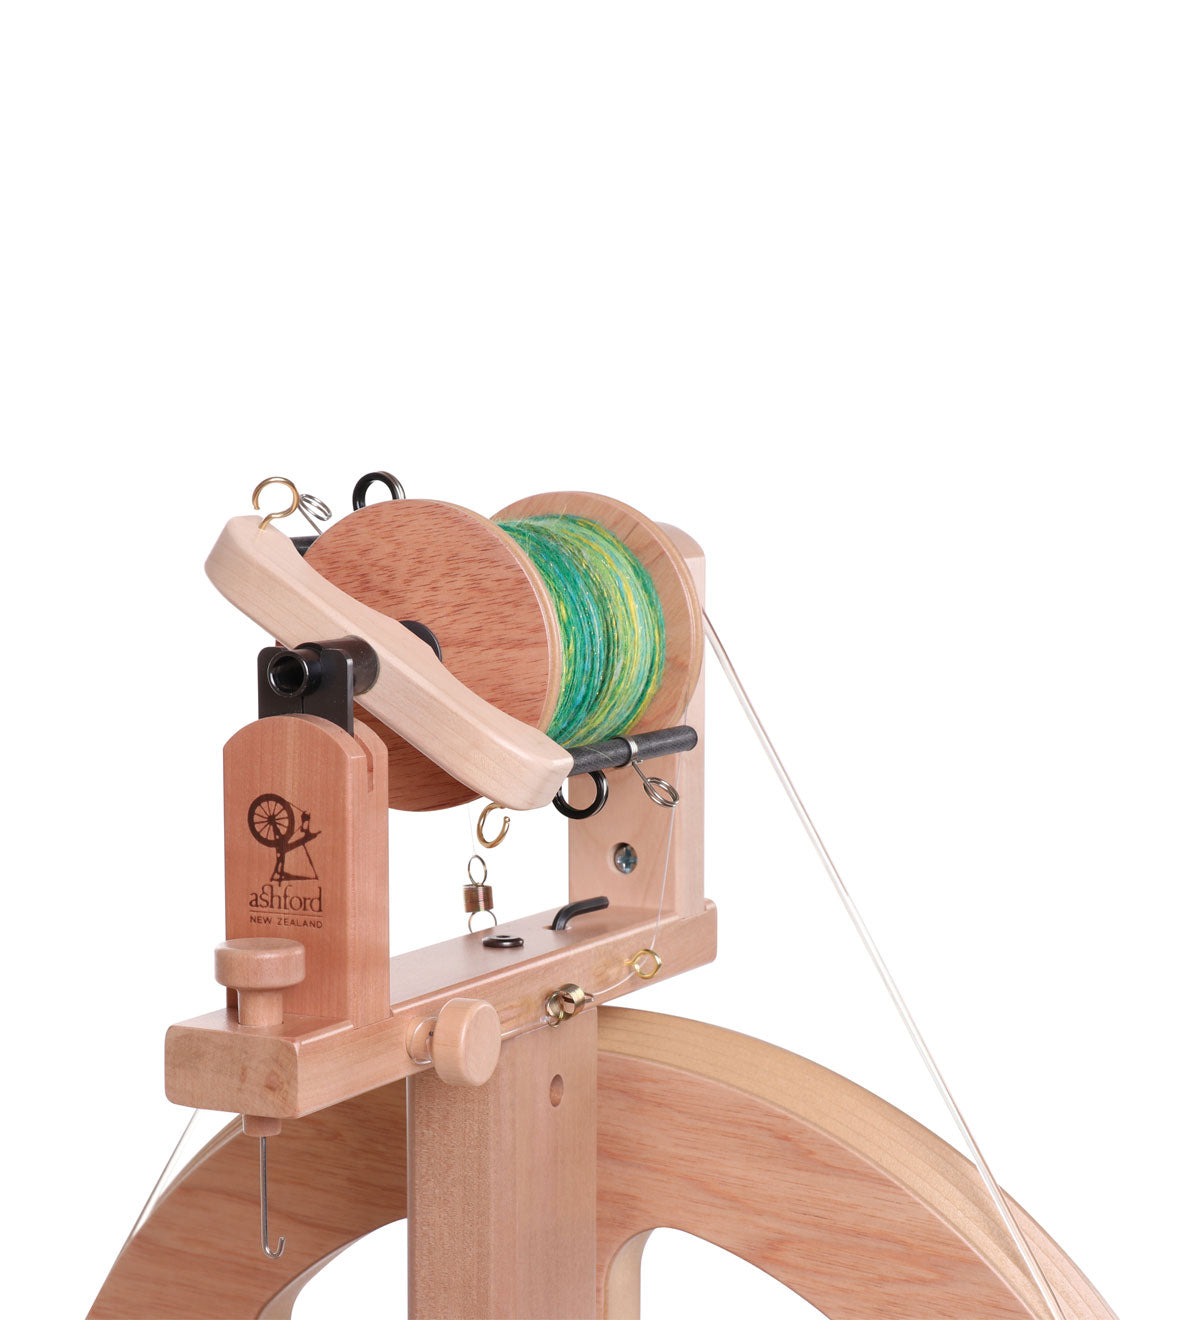 Kiwi 3 Spinning Wheel (Pre Order Only)